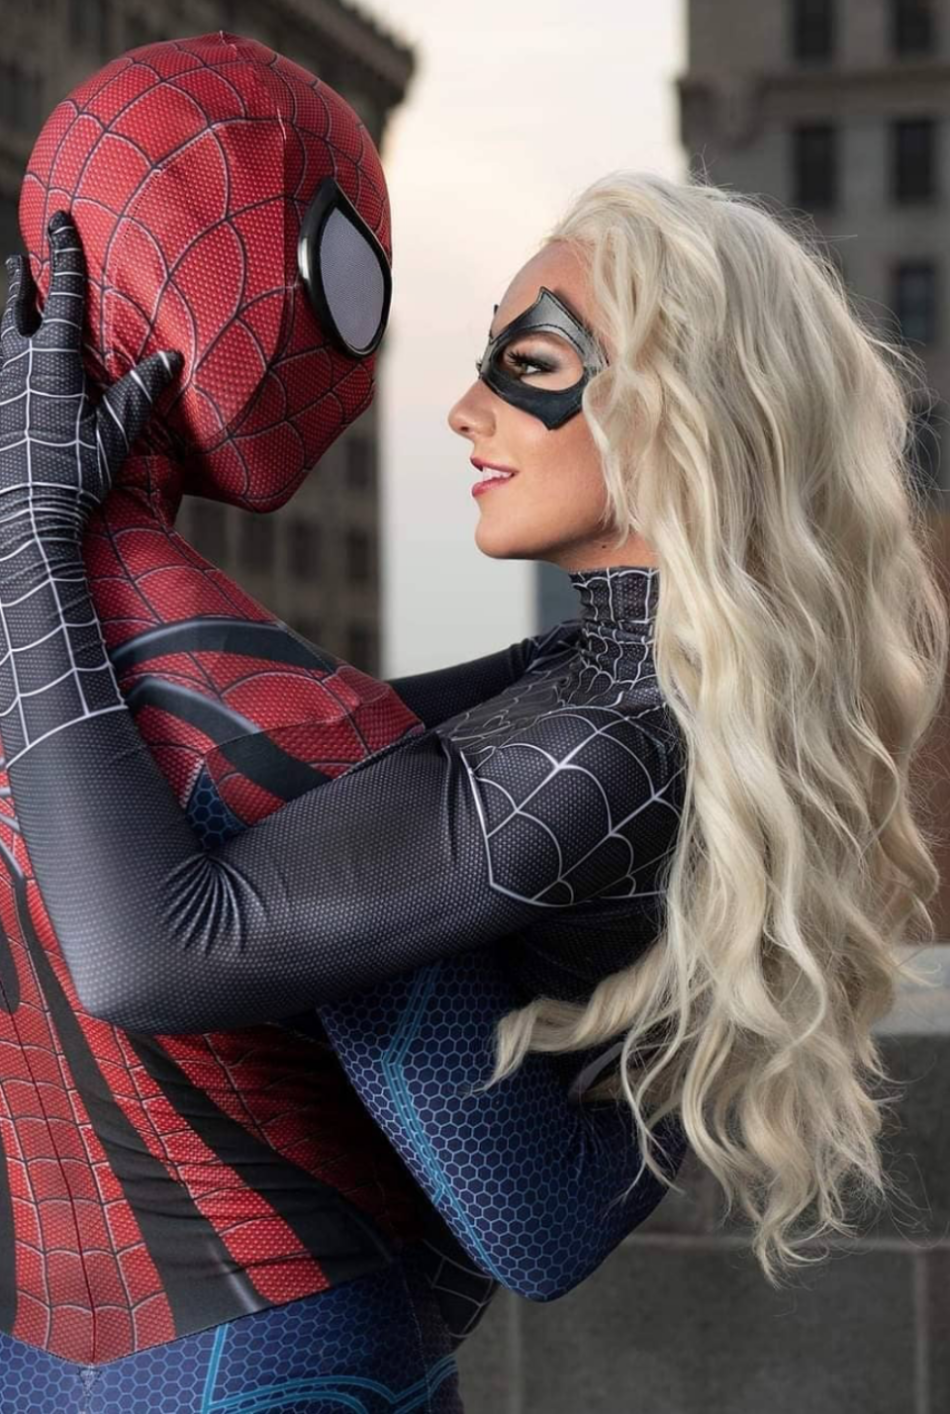 Sexy Red Hot Cosplay Girls Spiderman Women Best Photo Compilation 2021 (89 HQ Photos) 515